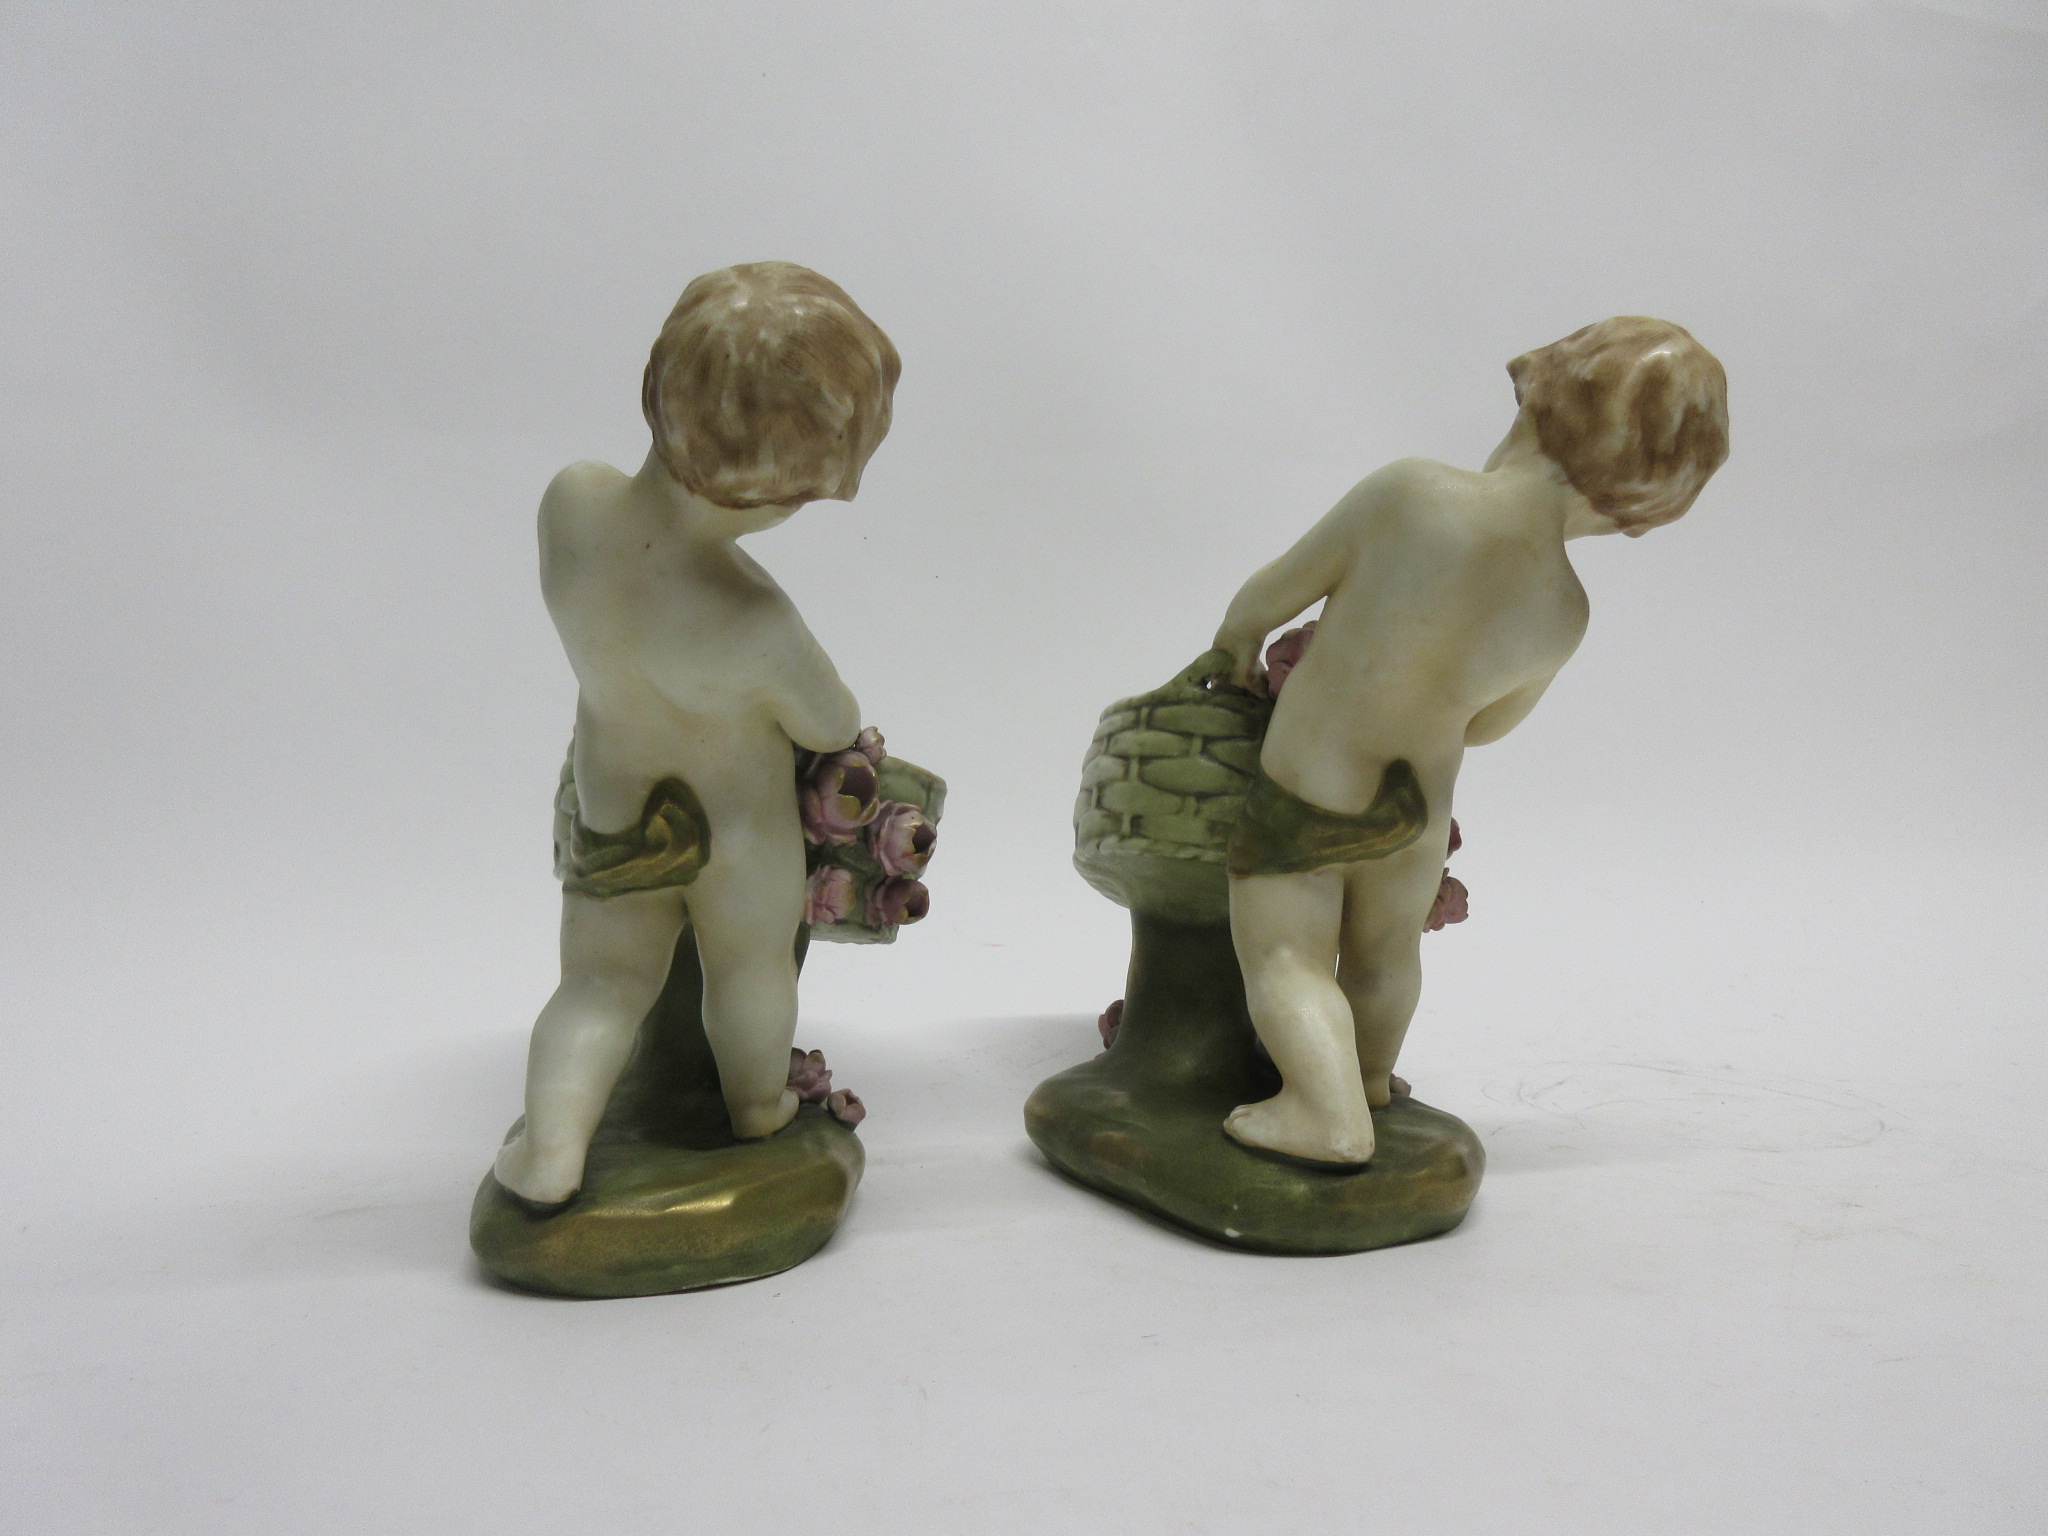 Pair of Austrian amphora figures of children holding baskets, one with restoration (2) - Image 4 of 4